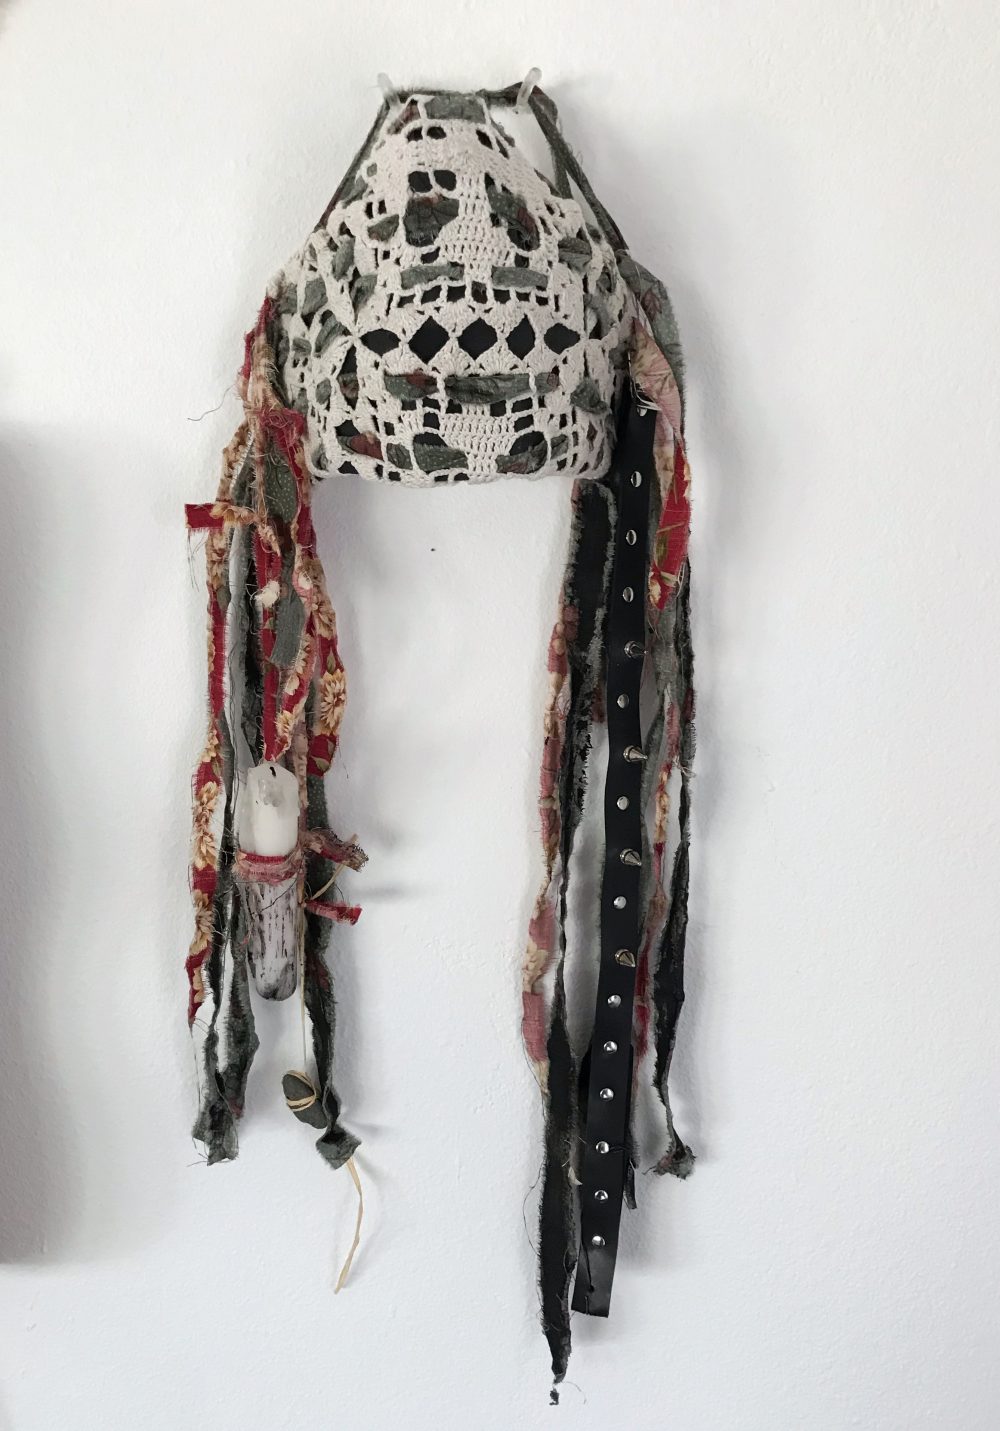 A facemask covering half the face created by a foundation of cardboard. The ground of the mask is black with a doily wrapped around the front. The holes of the doily create almost a skull-like appearance. Attached to either side of the mask are strips of torn fabric with a red floral motif. Some fabric pieces are covered in black paint. A candle is attached but not lit, dangles down with the strips of fabric. A small rock is tied with twine and attached in a similar way. A strip of leather with spikes is also attached, mimicking the strips of fabric in the piece.